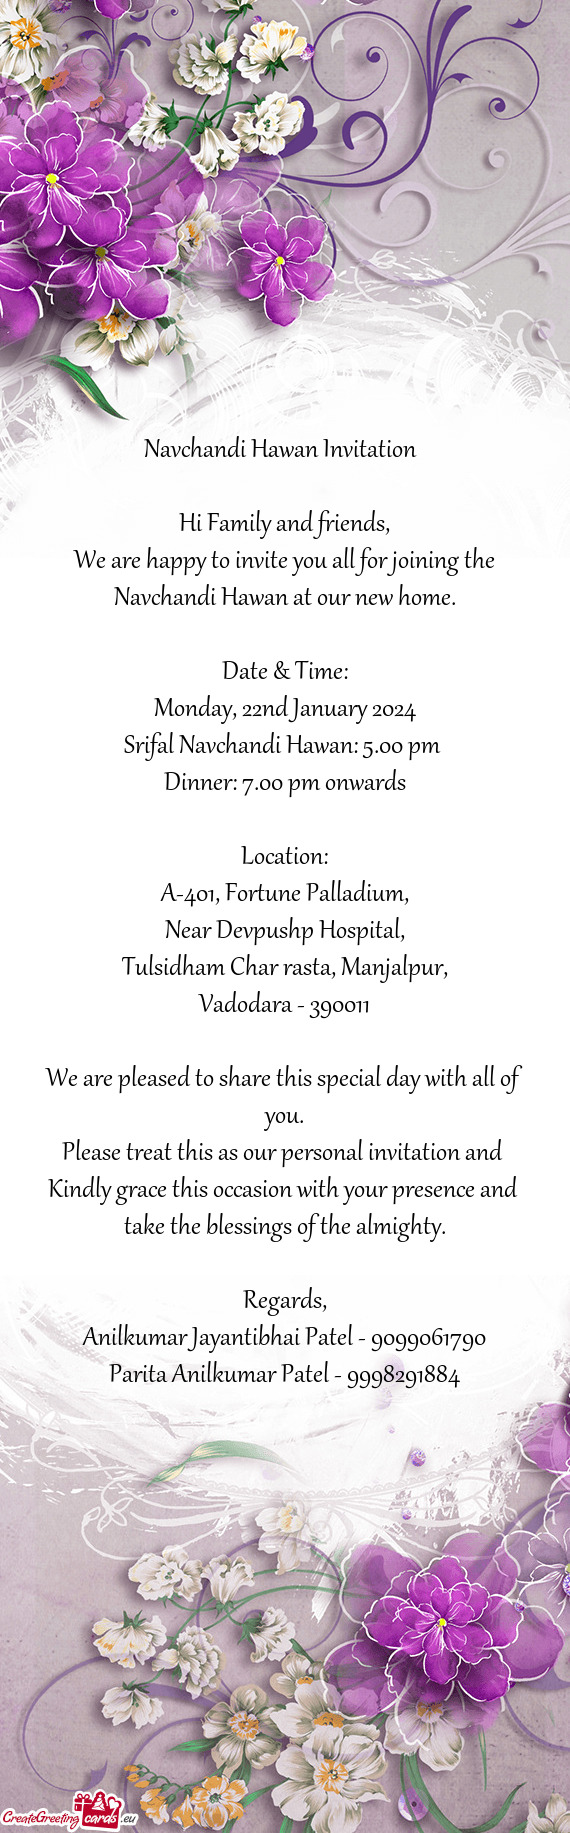 We are happy to invite you all for joining the Navchandi Hawan at our new home